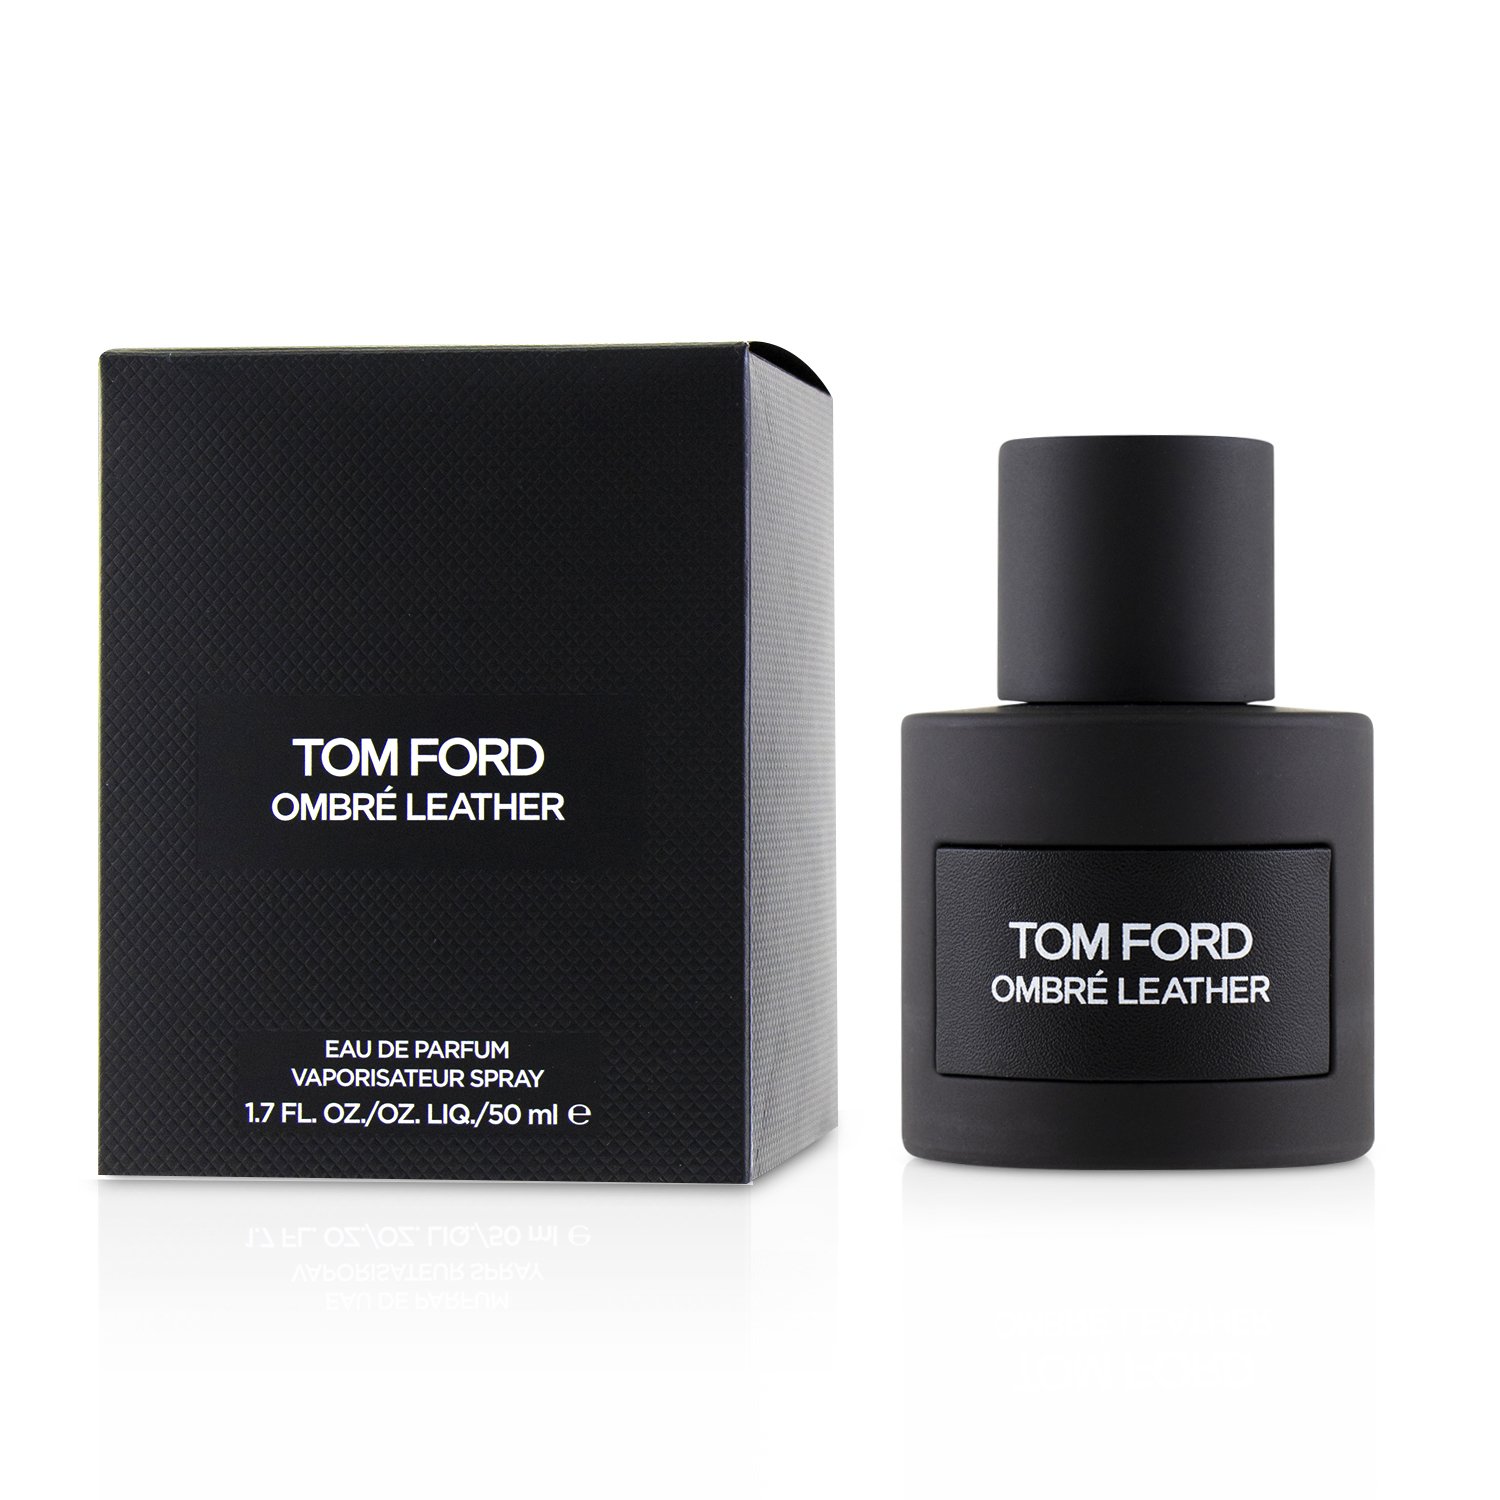 Tom Ford - Ombre Leather 神秘曠野女性香水 50ml/100ml